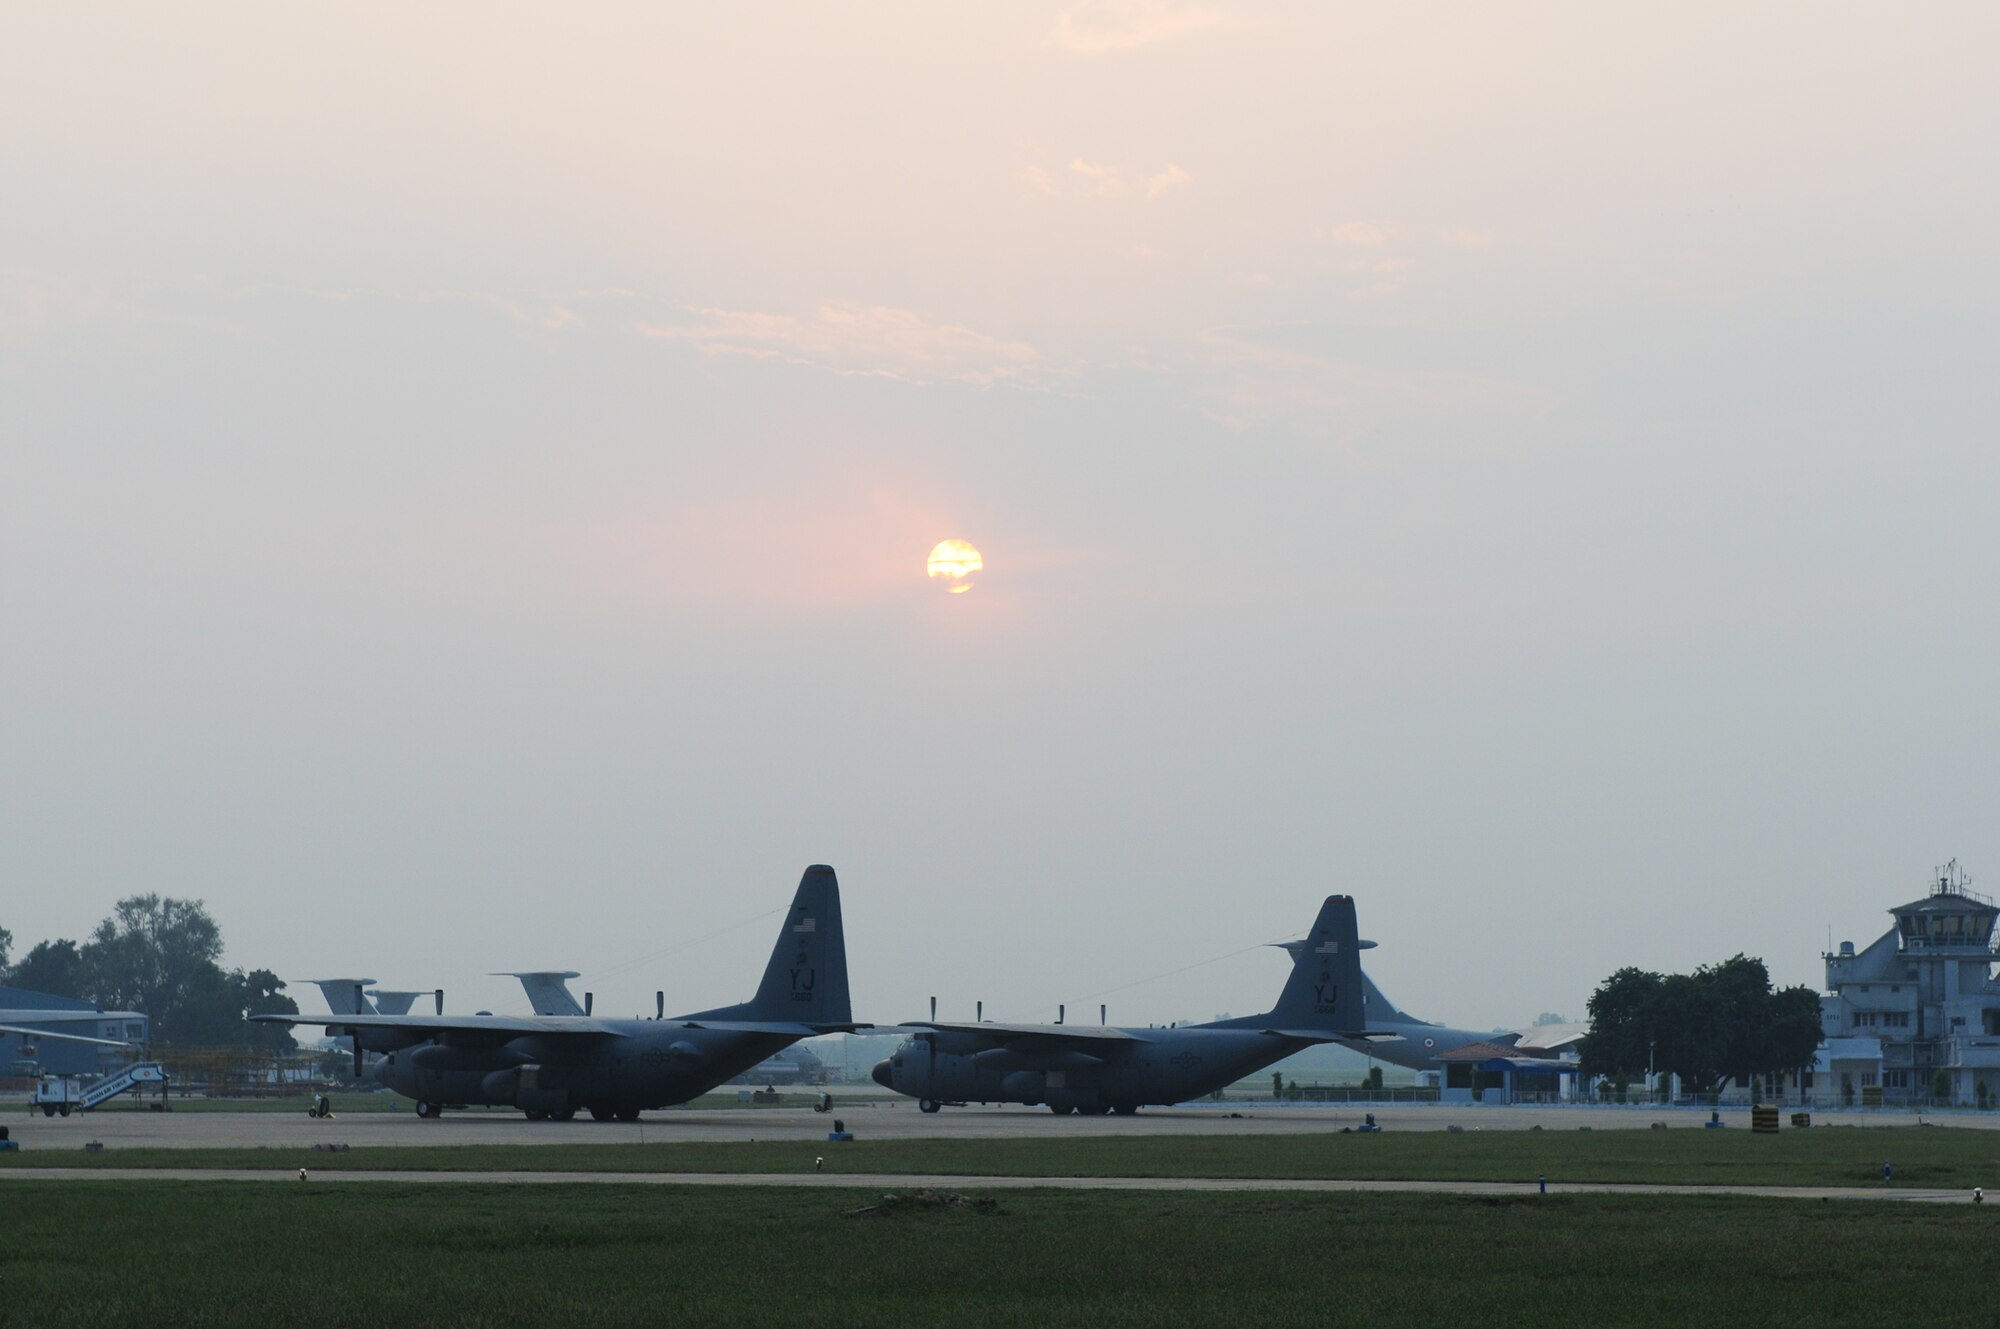 two U.S. Air Force C-130 Hercules aircraft from the 36th Airlift Squadron at Yokota Air Base, Japan, parked under a Indian sunset at Air Force Station Agra, India. The aircraft along with a C-17 Globemaster III and more than 150 U.S. Air Force and Army personnel are deployed here as part of exercise Cope India, a humanitarian assistance disaster relief exercise Oct. 19 to 24. (U.S. Air Force photo/Capt. Genieve David)